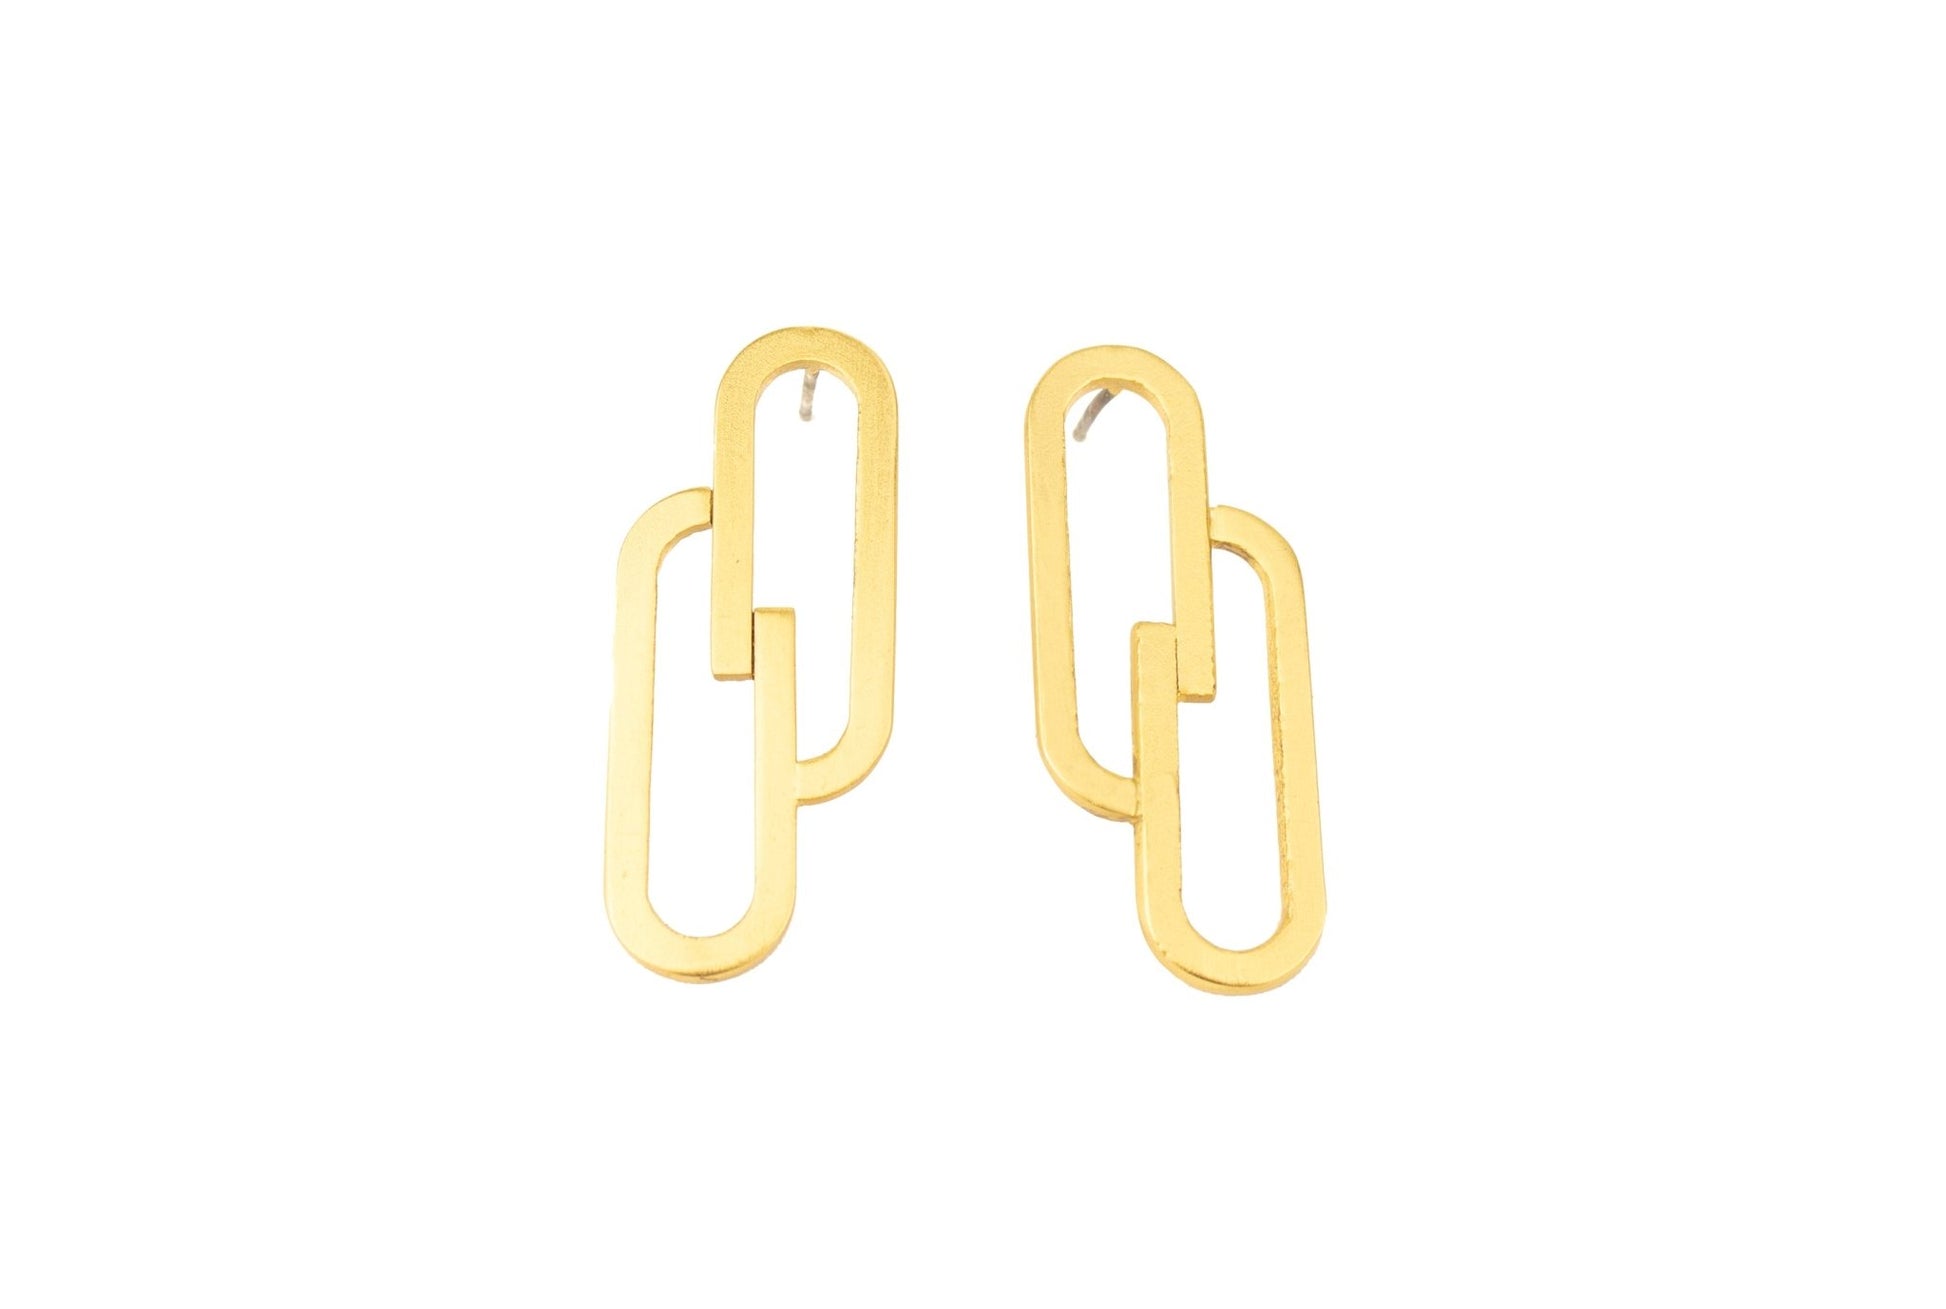 Deco Gold Studs -earrings- Lindsey Snell